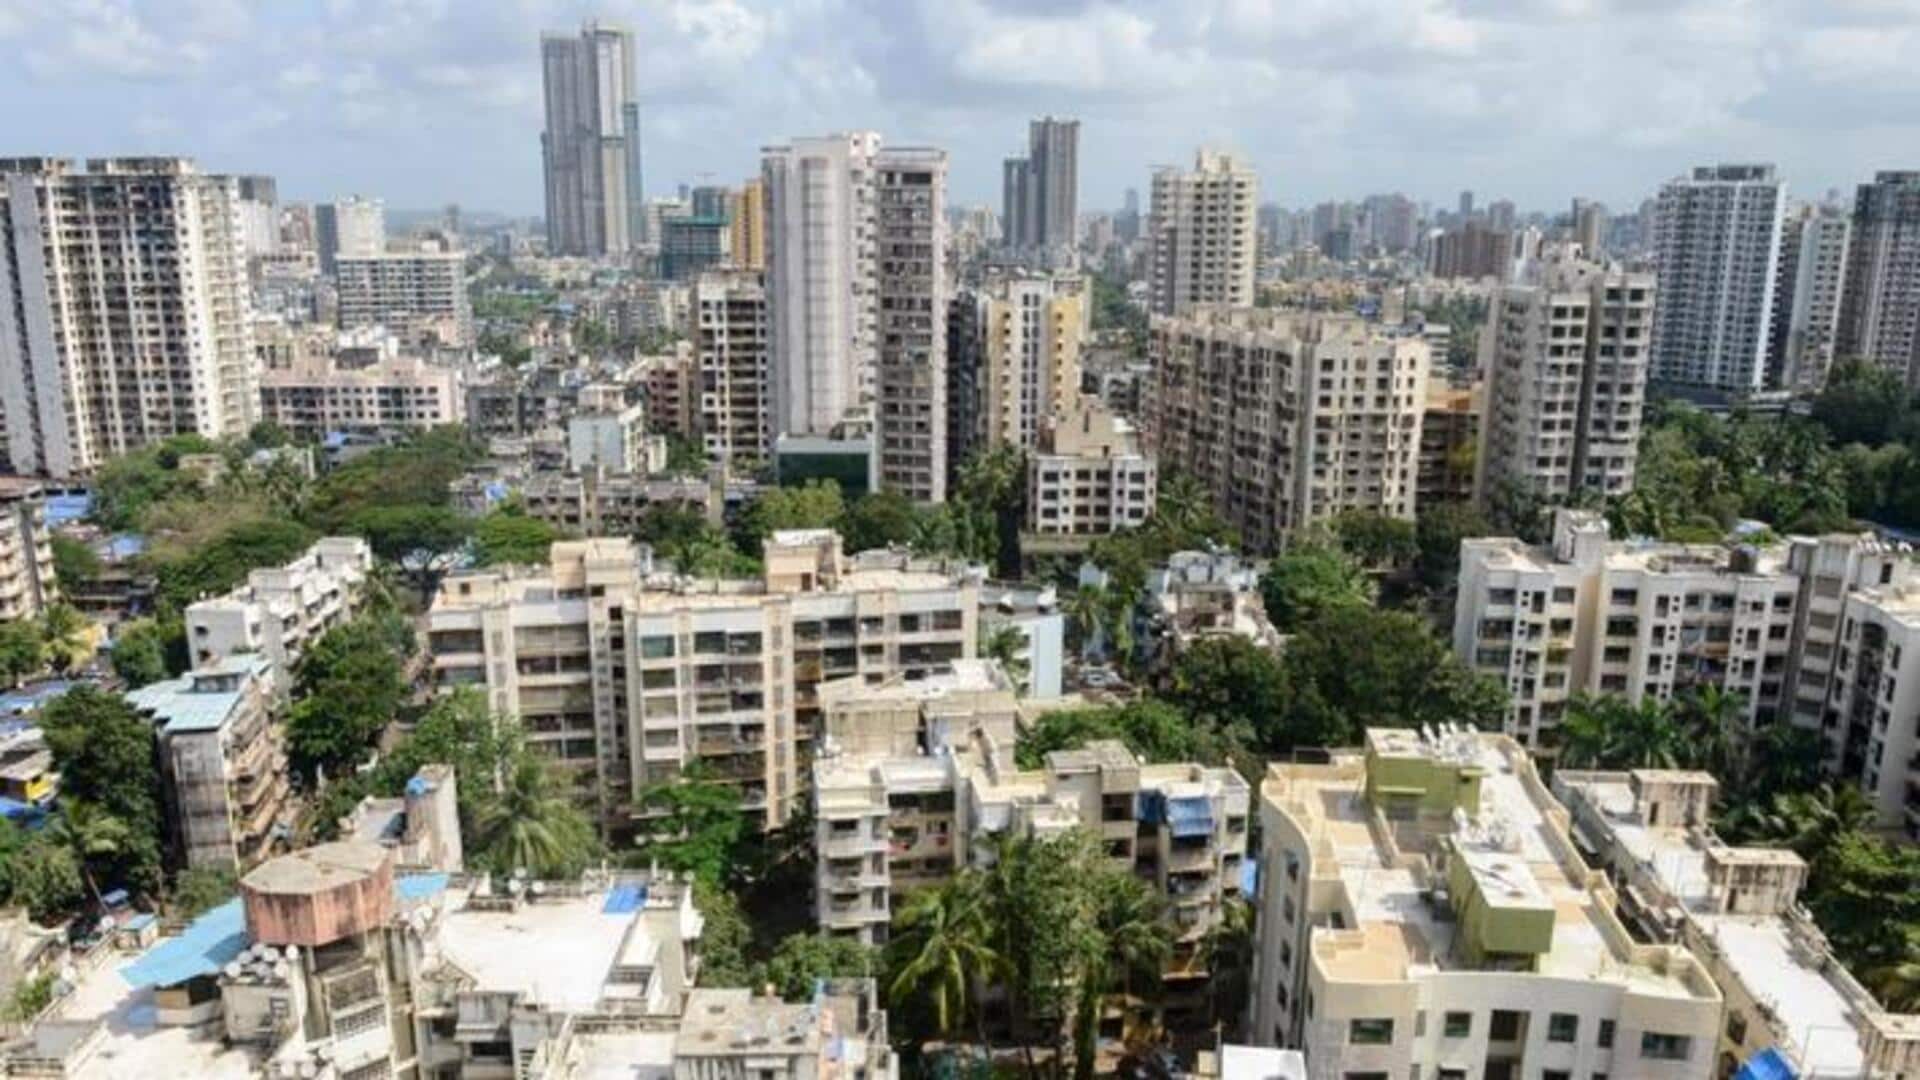 Karnataka nets Rs. 311cr in a day from property registrations